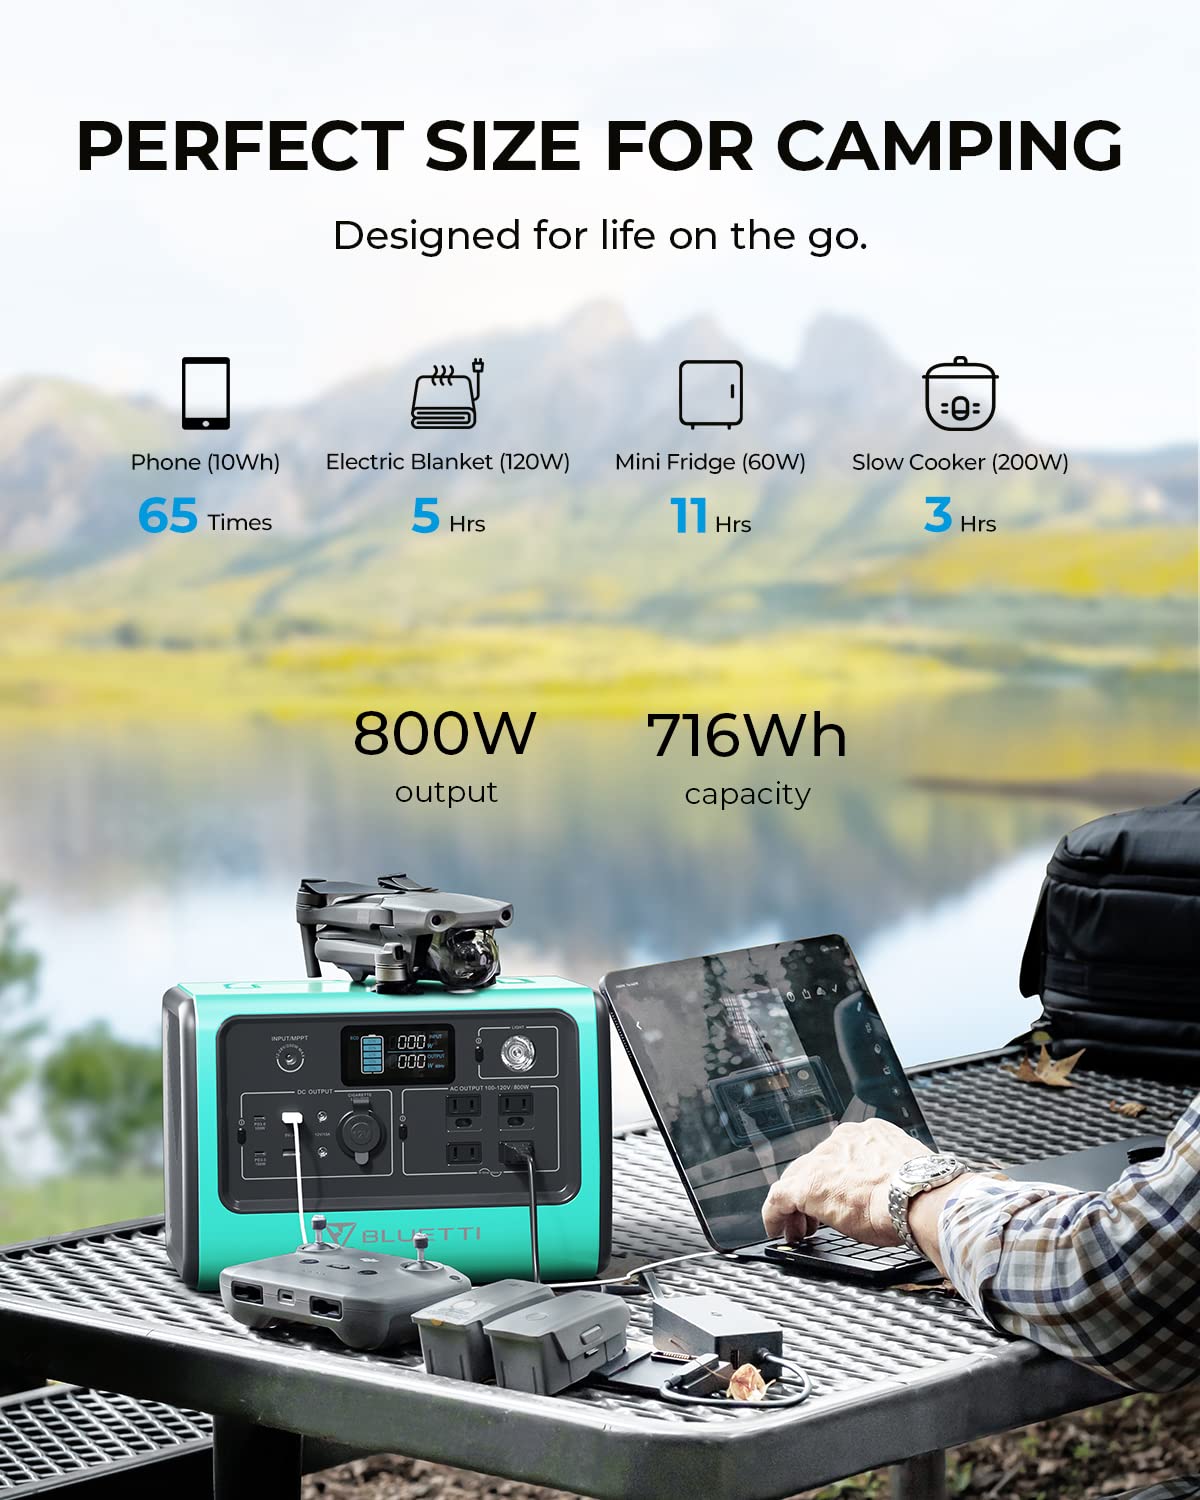 BLUETTI Portable Power Station EB70S, 716Wh LiFePO4 Battery Backup w/ 4 800W AC Outlets (1,400W Peak), 100W Type-C, Solar Generator for Road Trip, Power Outage (Solar Panel Optional) NOTE: BLACK